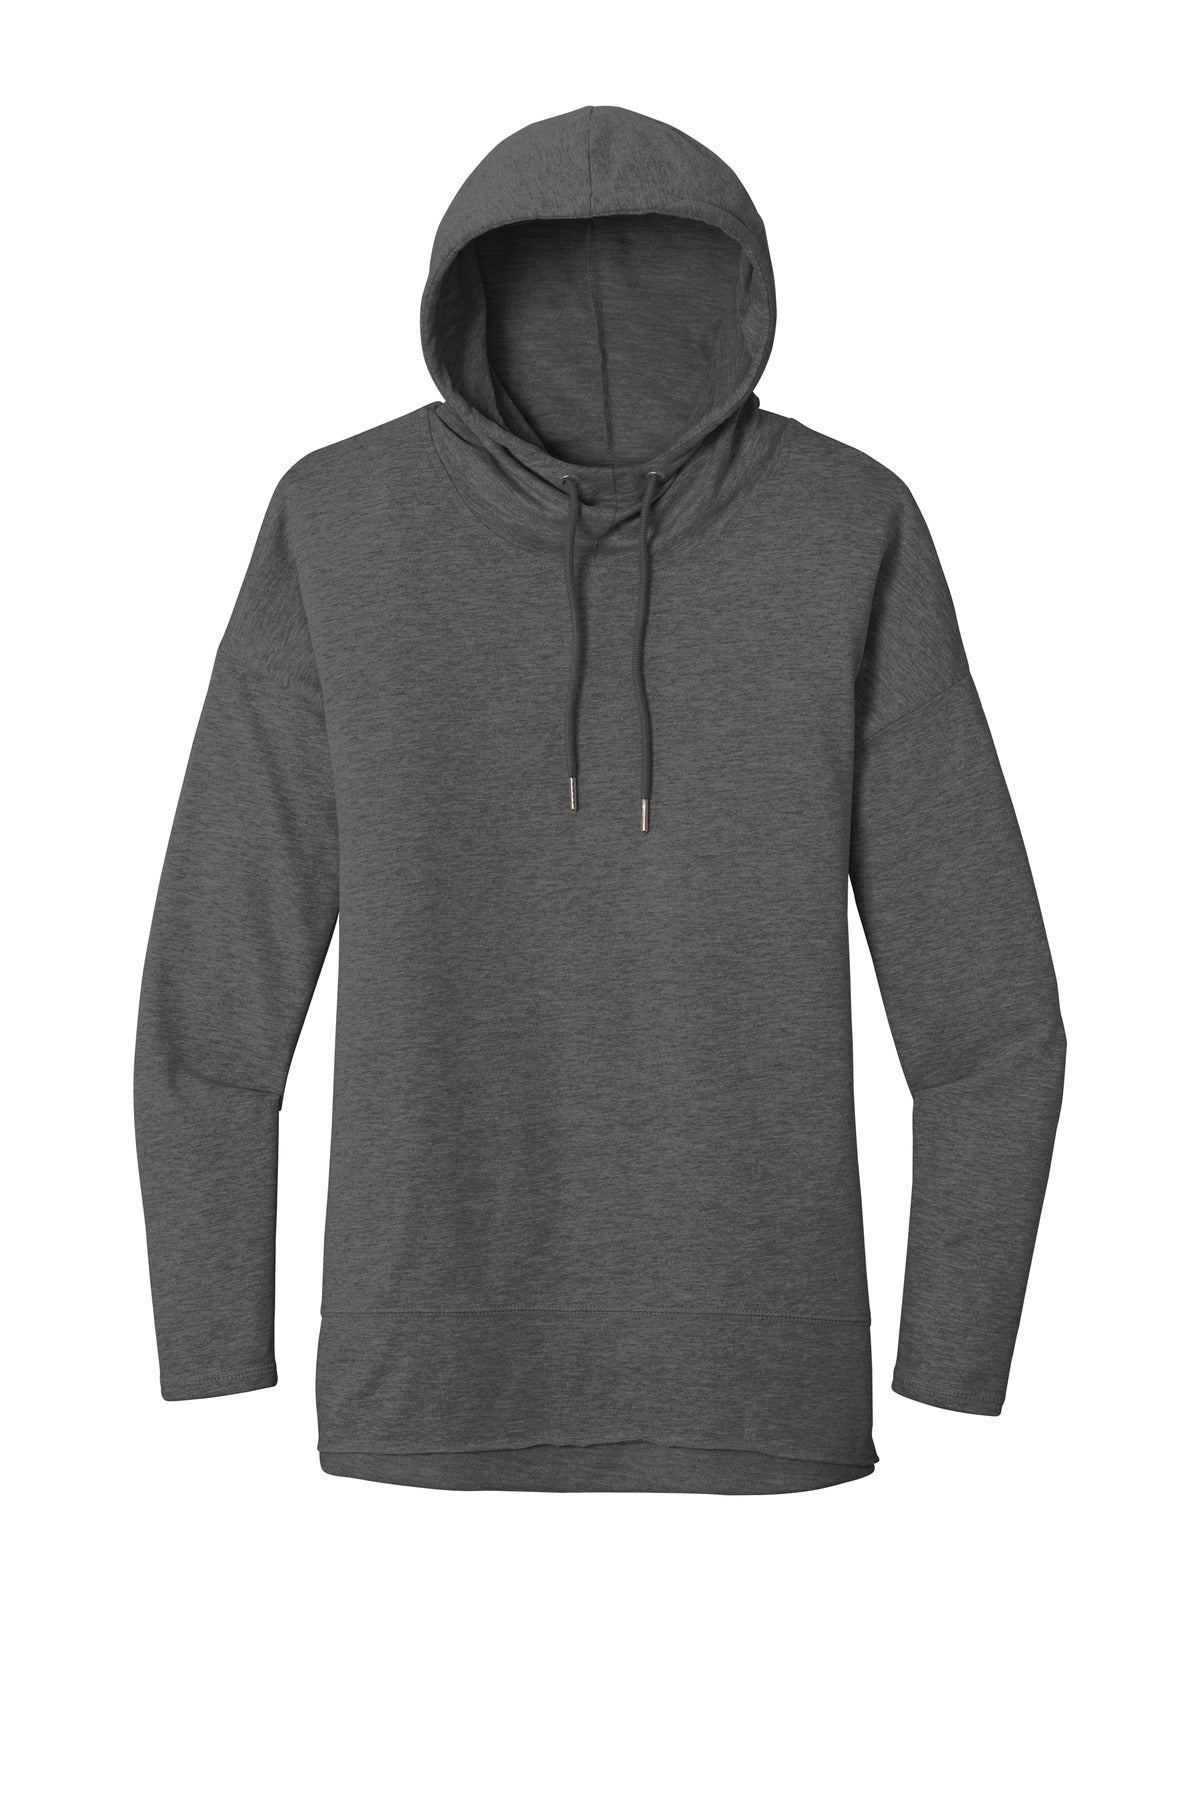 District Women's Featherweight French Terry ™ Hoodie DT671